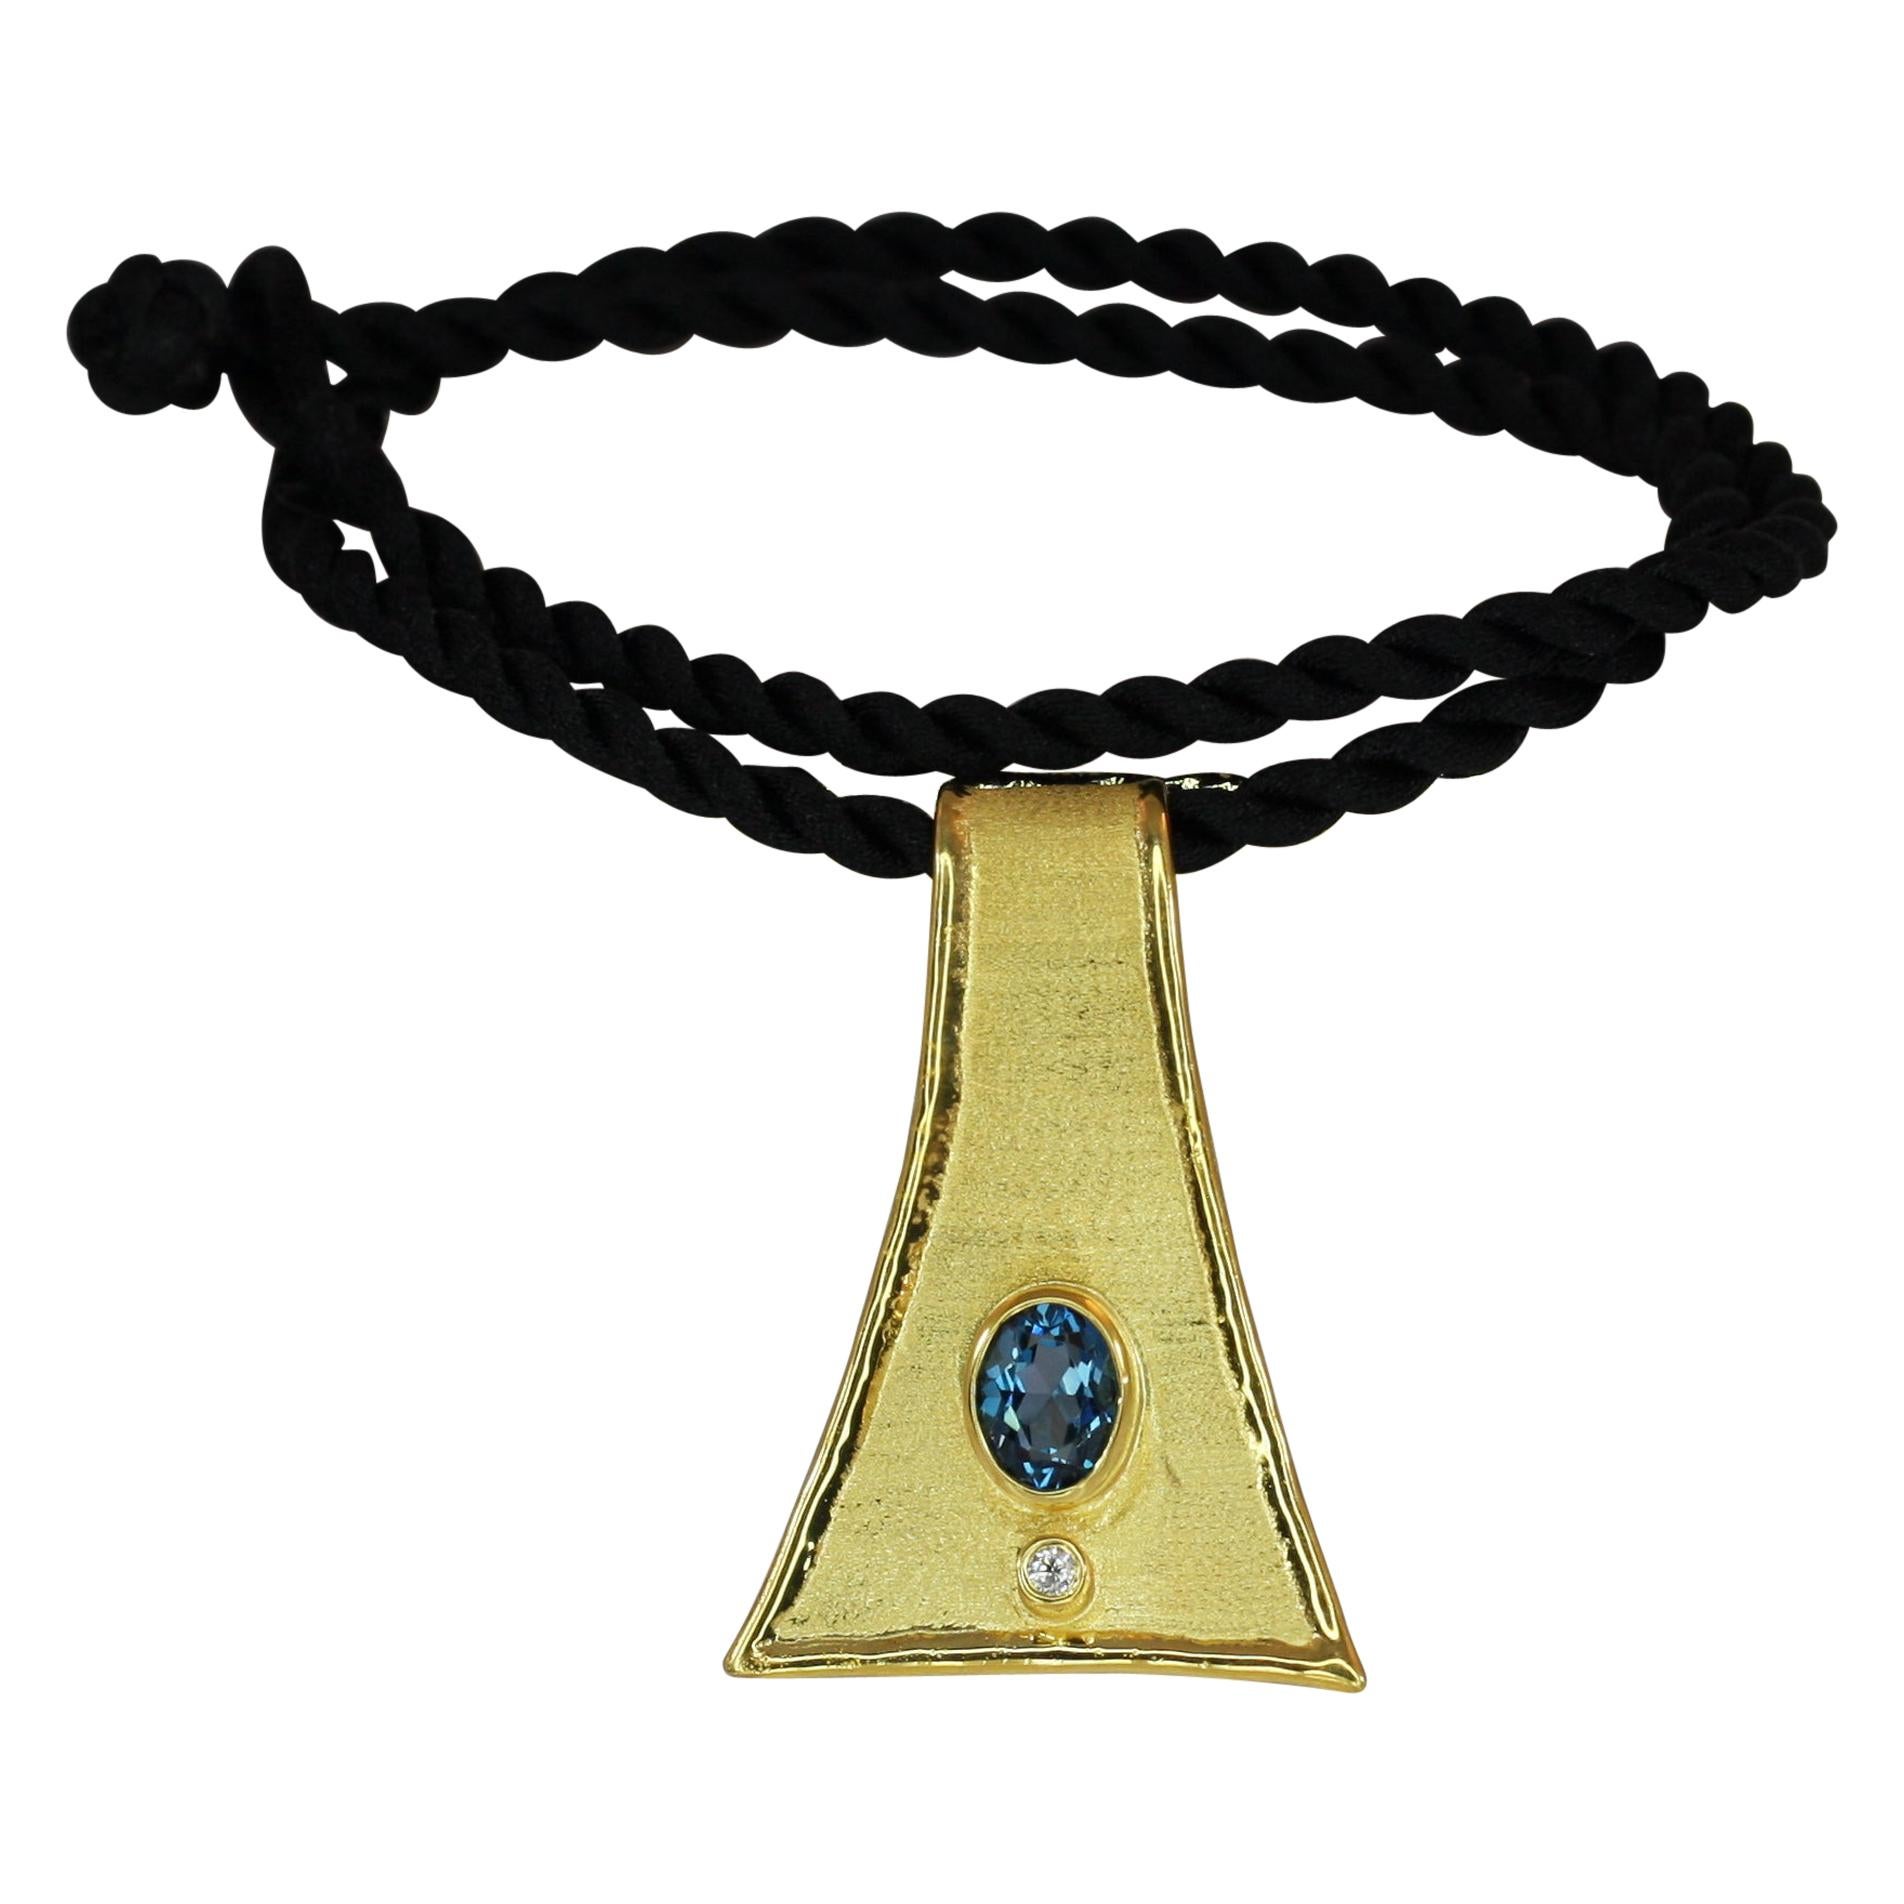 Yianni Creations 18 Karat Gold Pendant Necklace with Blue Topaz and Diamond